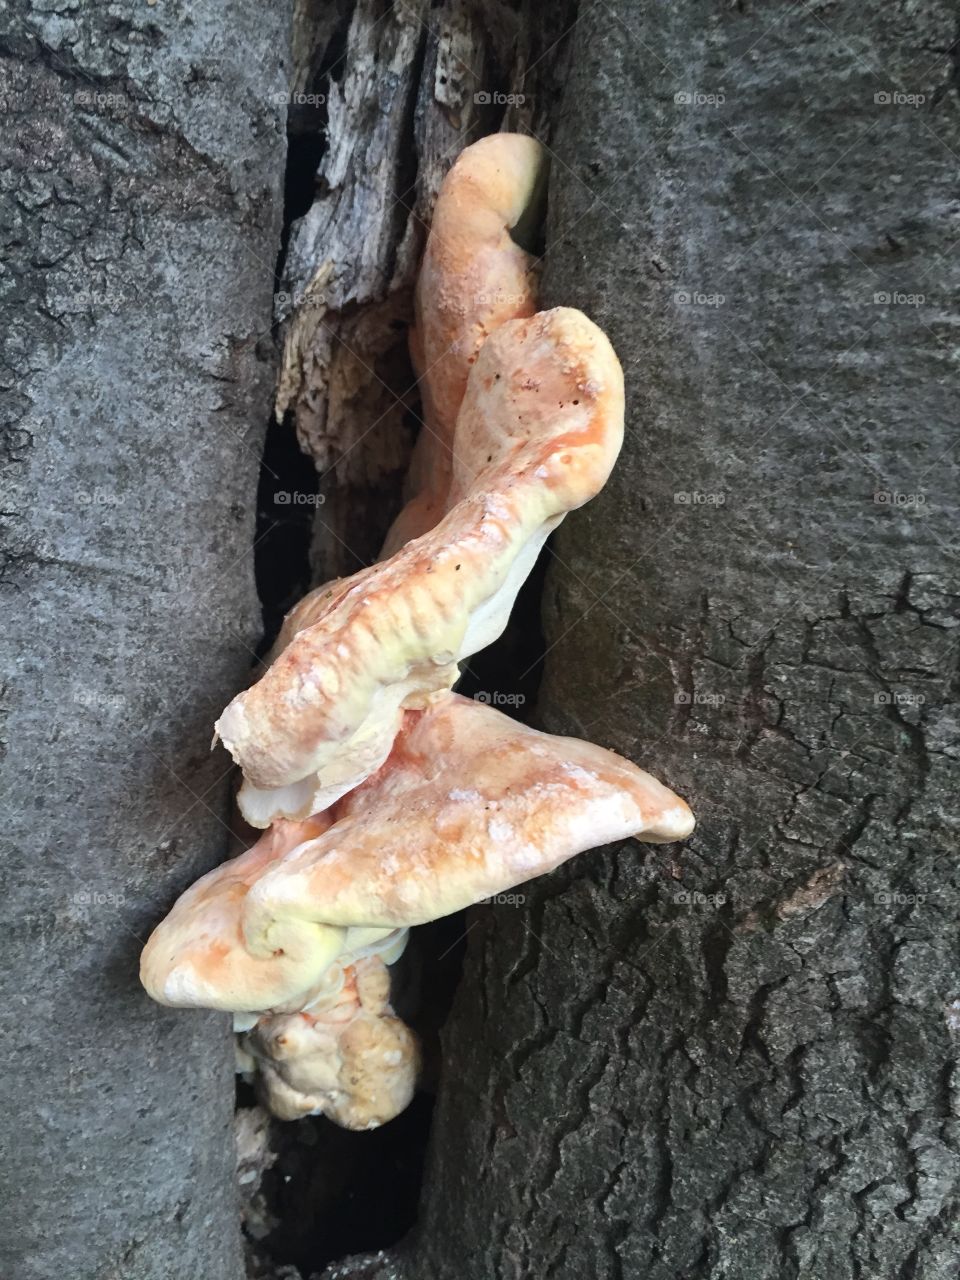 Natures unusual gifts. Unusual spiral of fungus growing out of knoll of hollow tree. 